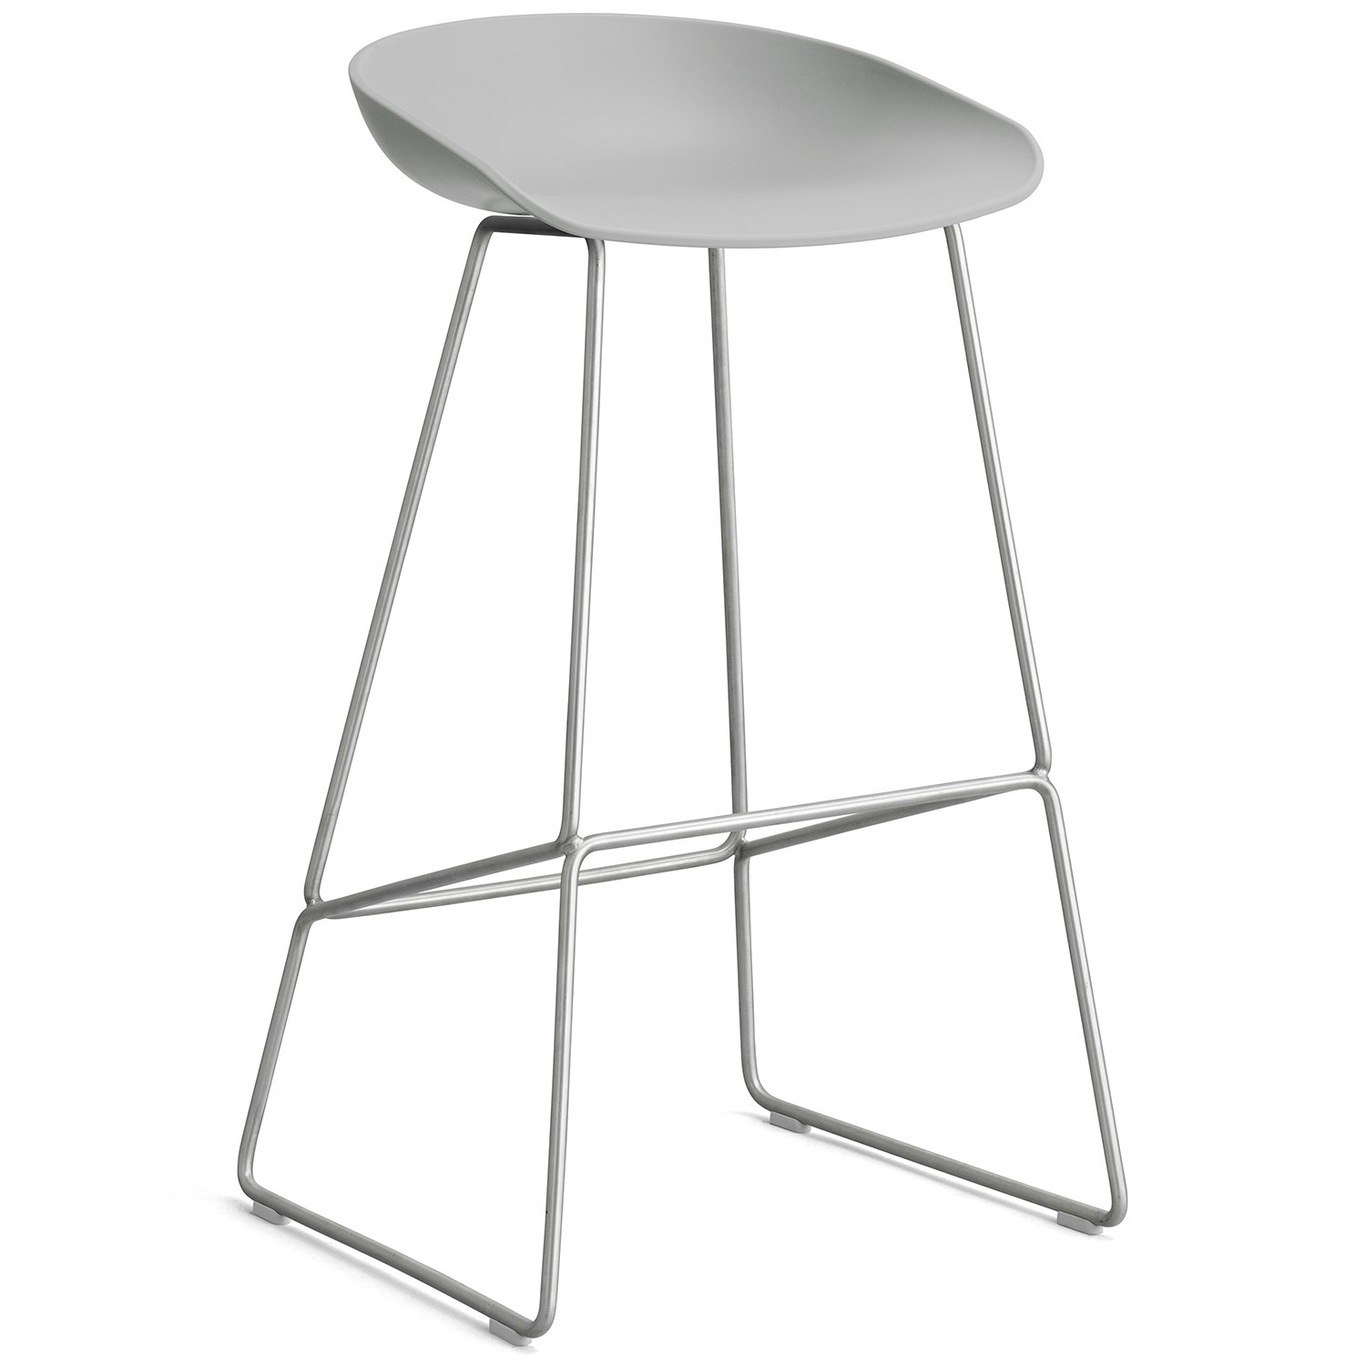 AAS 38 2.0 Bar Stool 75 cm, Stainless Steel / Concrete Grey